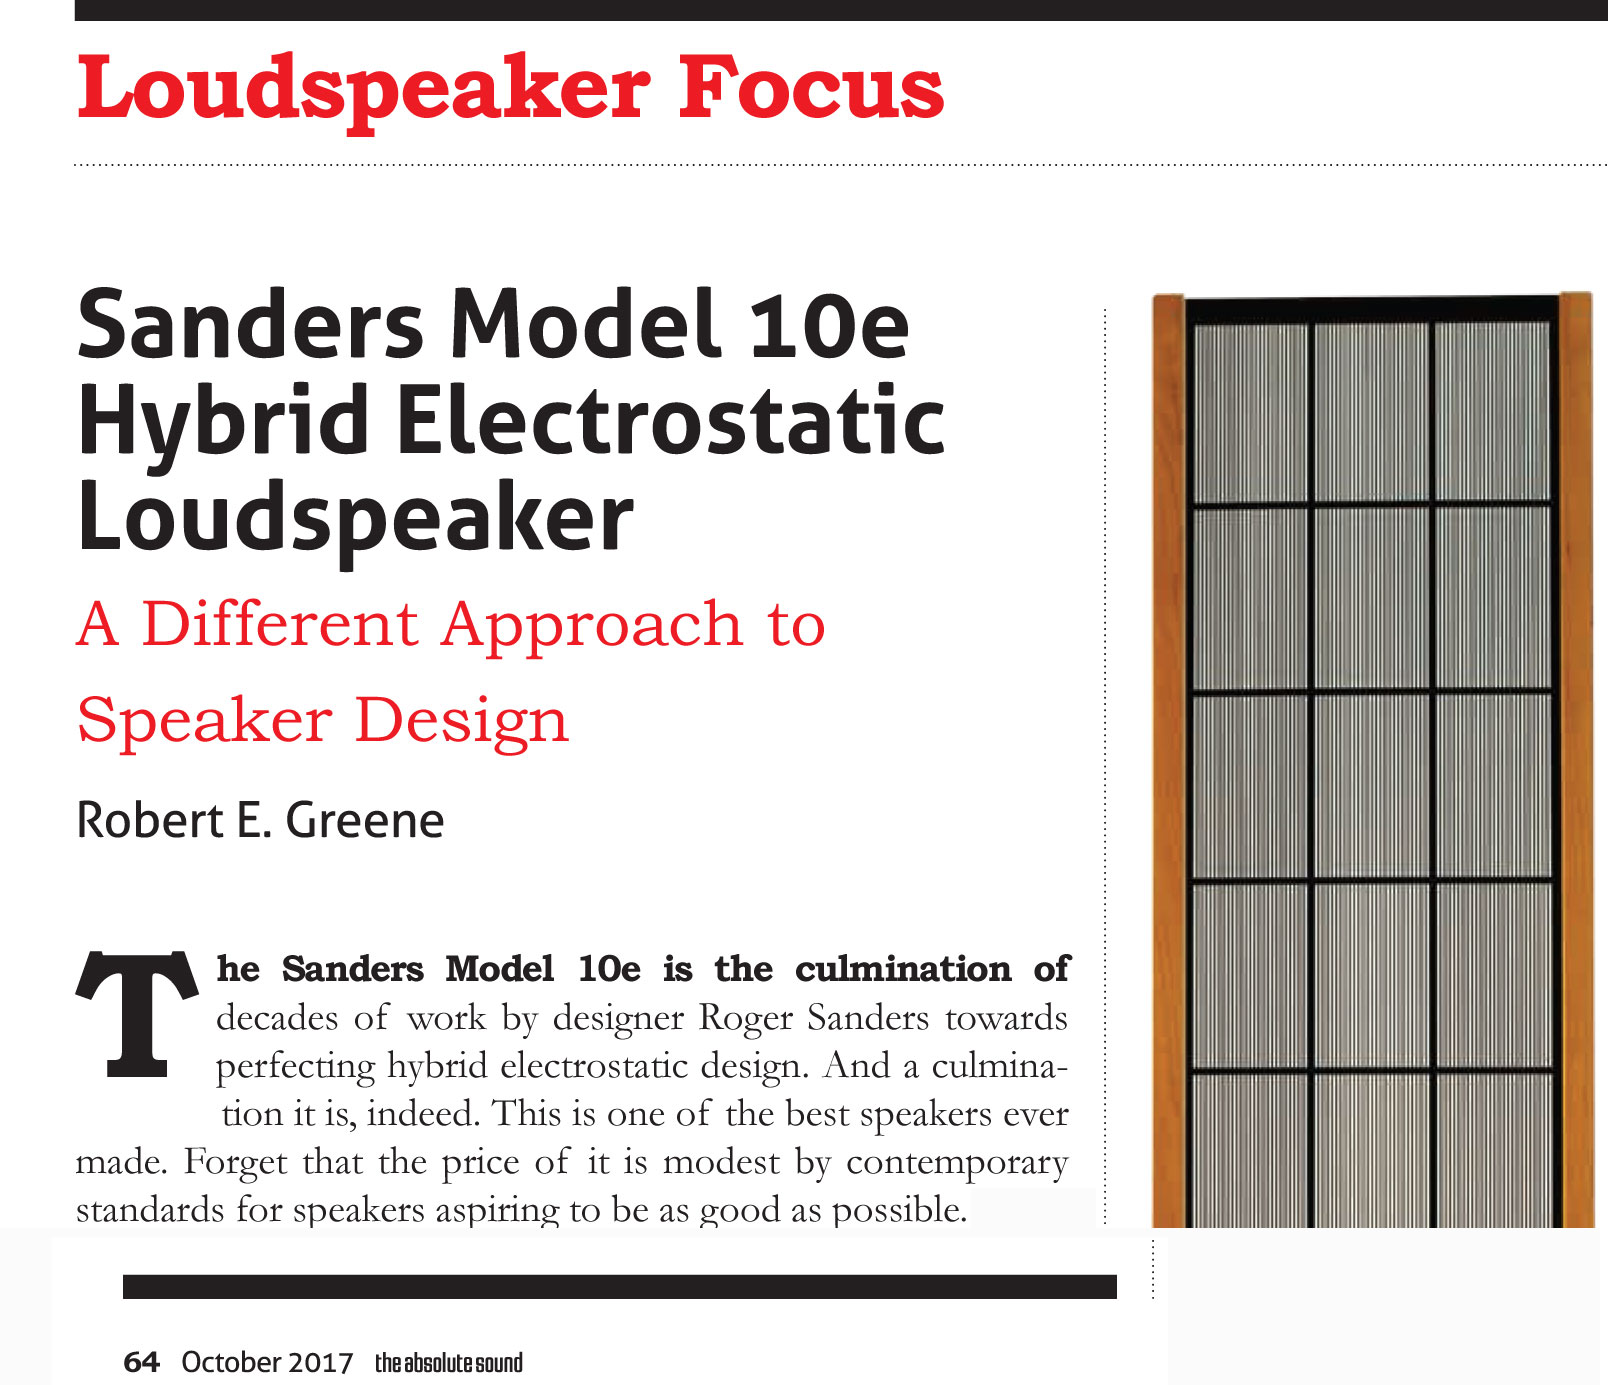 The Sanders Model 10e is the culmination of decades of work by designer Roger Sanders towards perfecting hybrid electrostatic design. And a culmination it is, indeed. This is one of the best speakers ever made. Forget that the price of it is modest by contemporary standards for speakers aspiring to be as good as possible.